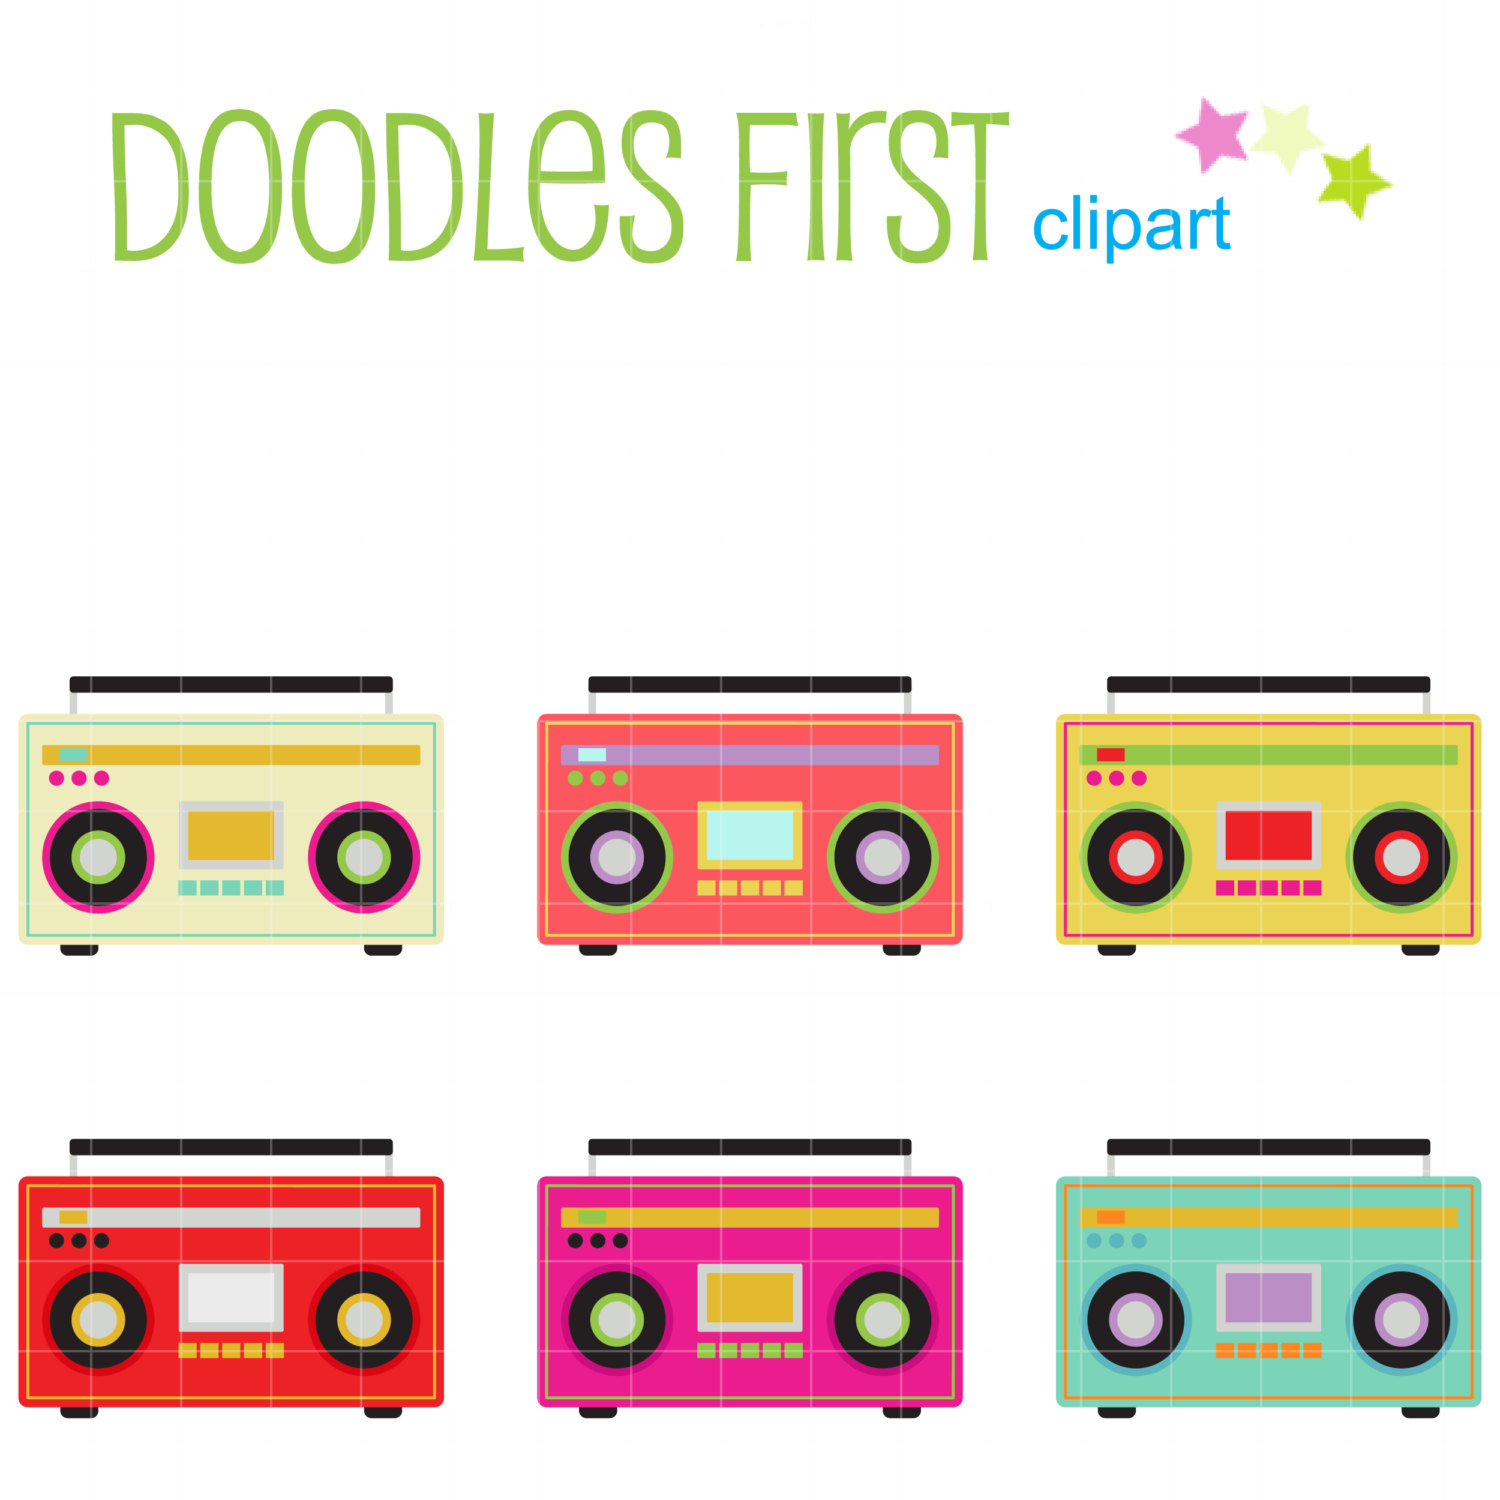 Funky Boombox Digital Clip Art for Scrapbooking by DoodlesFirst